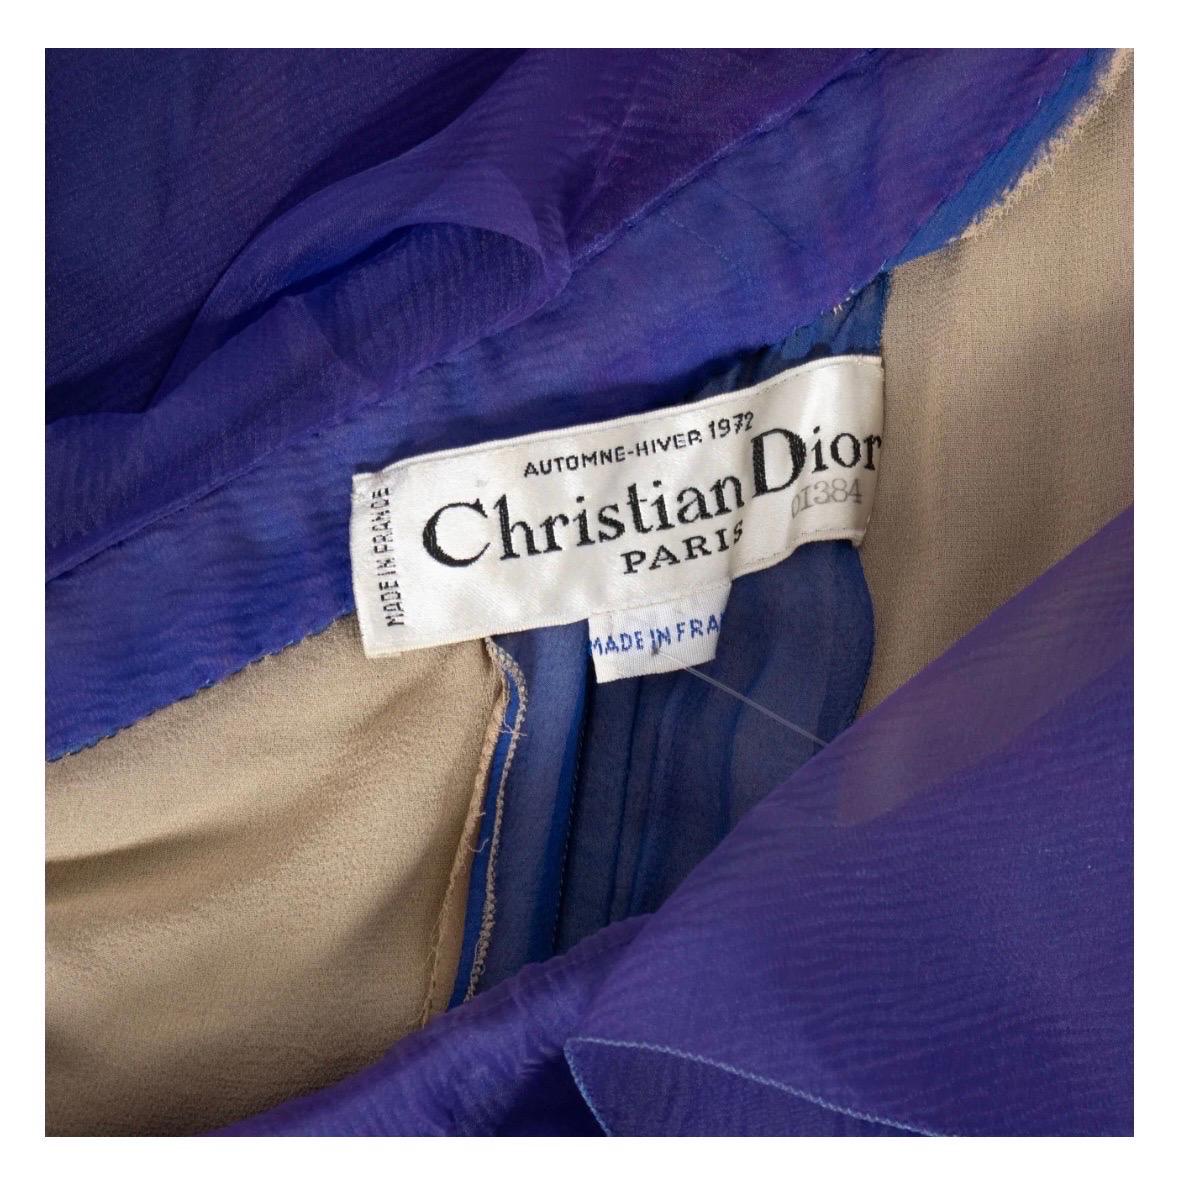 Christian Dior Haute Couture Silk Organza AW 1972 Gown For Sale 4